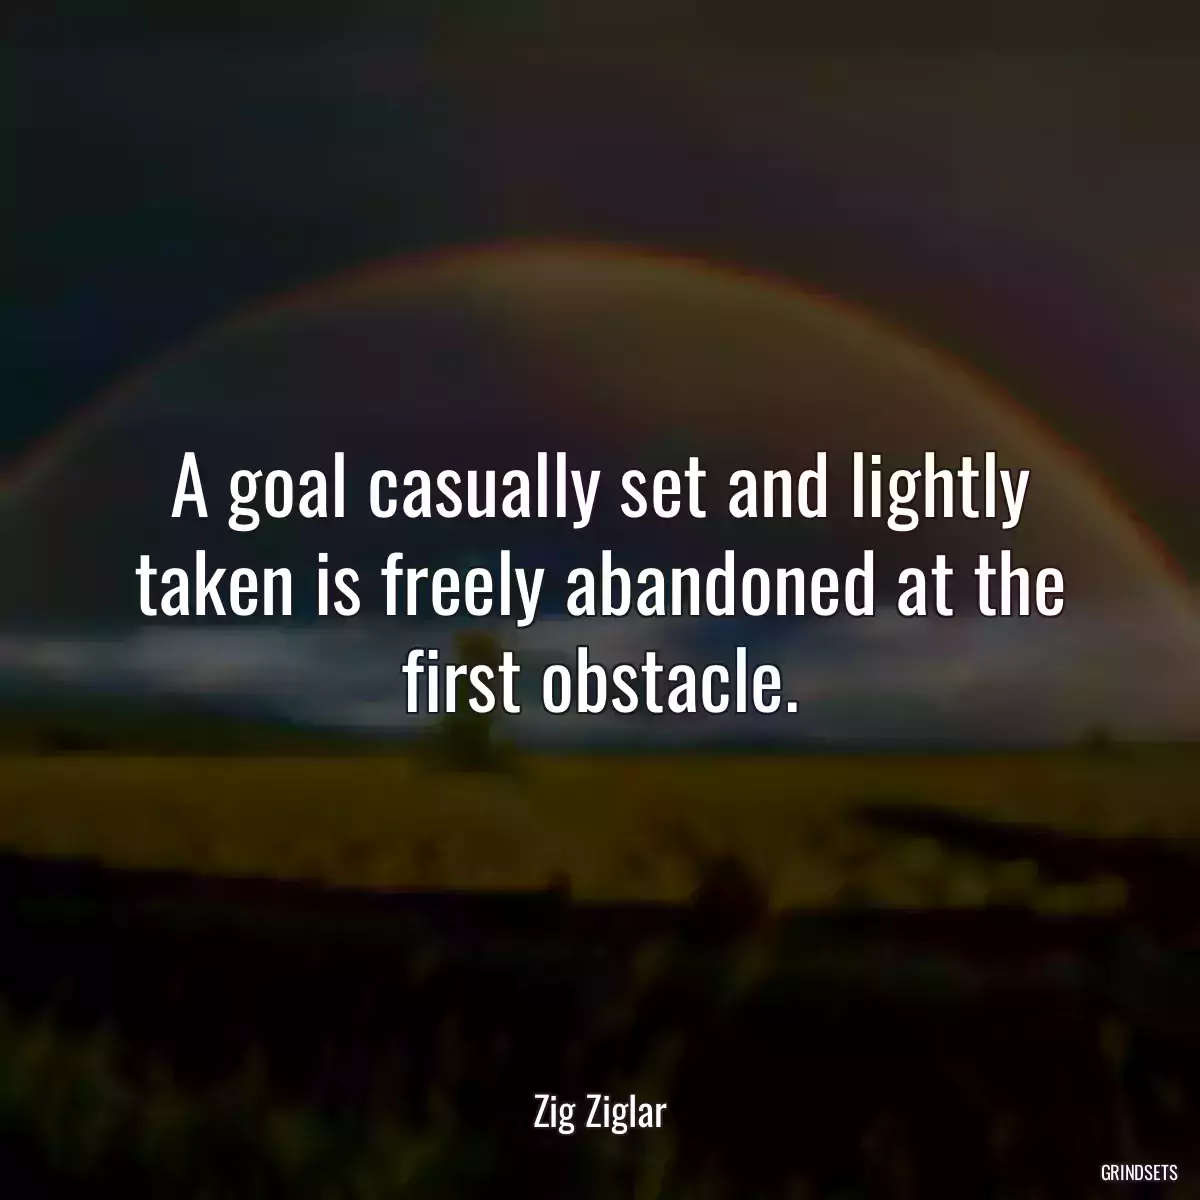 A goal casually set and lightly taken is freely abandoned at the first obstacle.